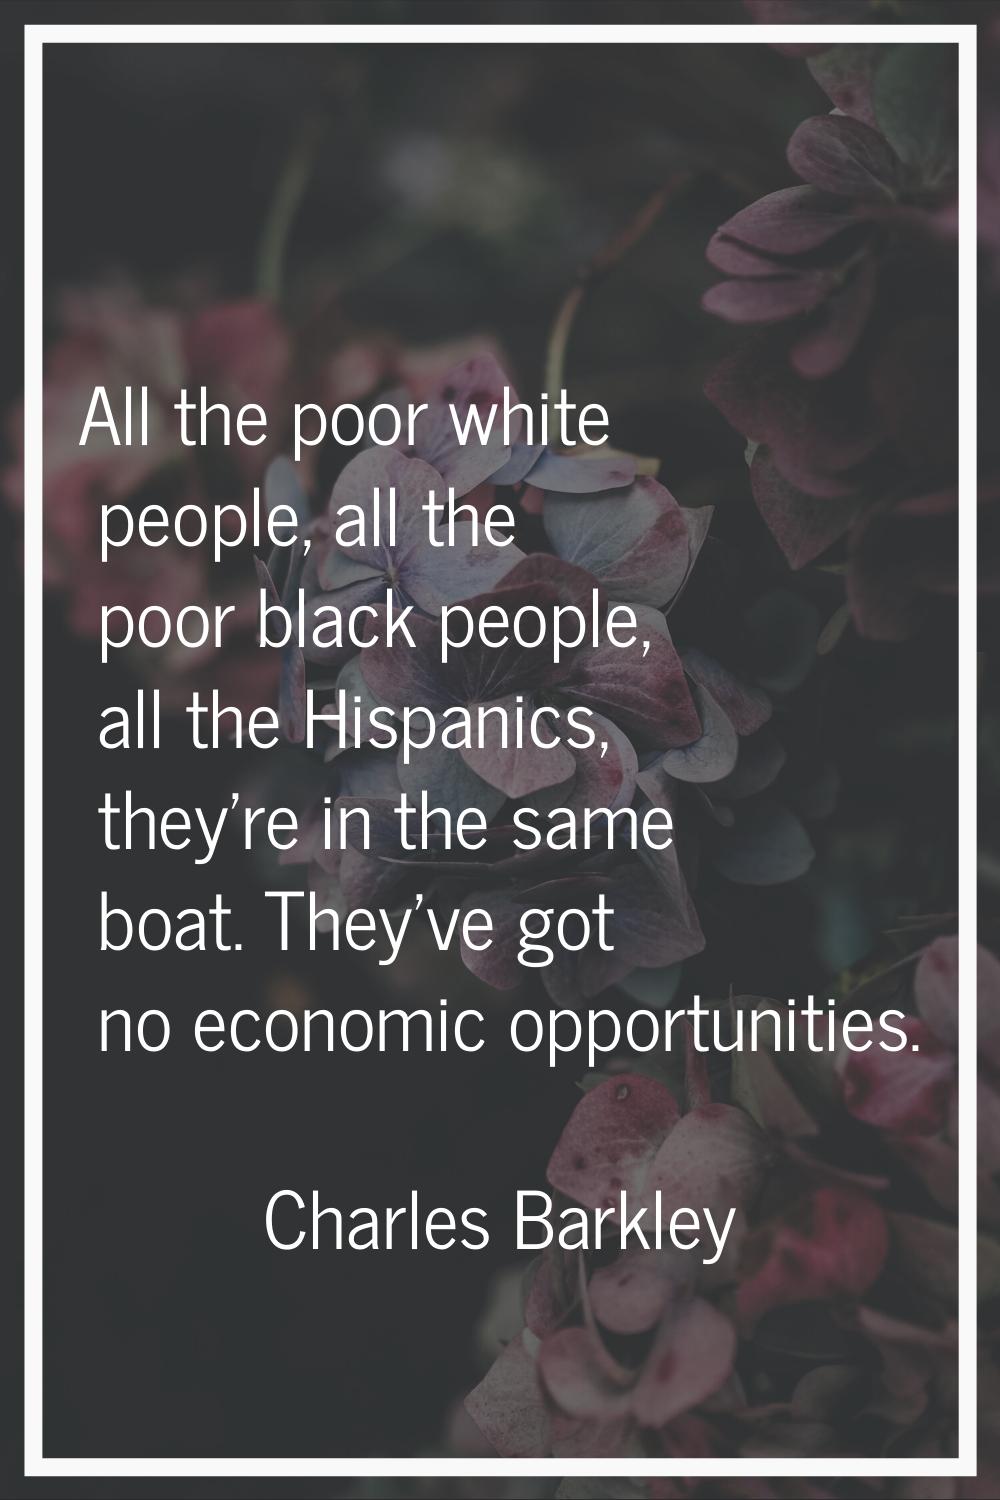 All the poor white people, all the poor black people, all the Hispanics, they're in the same boat. 